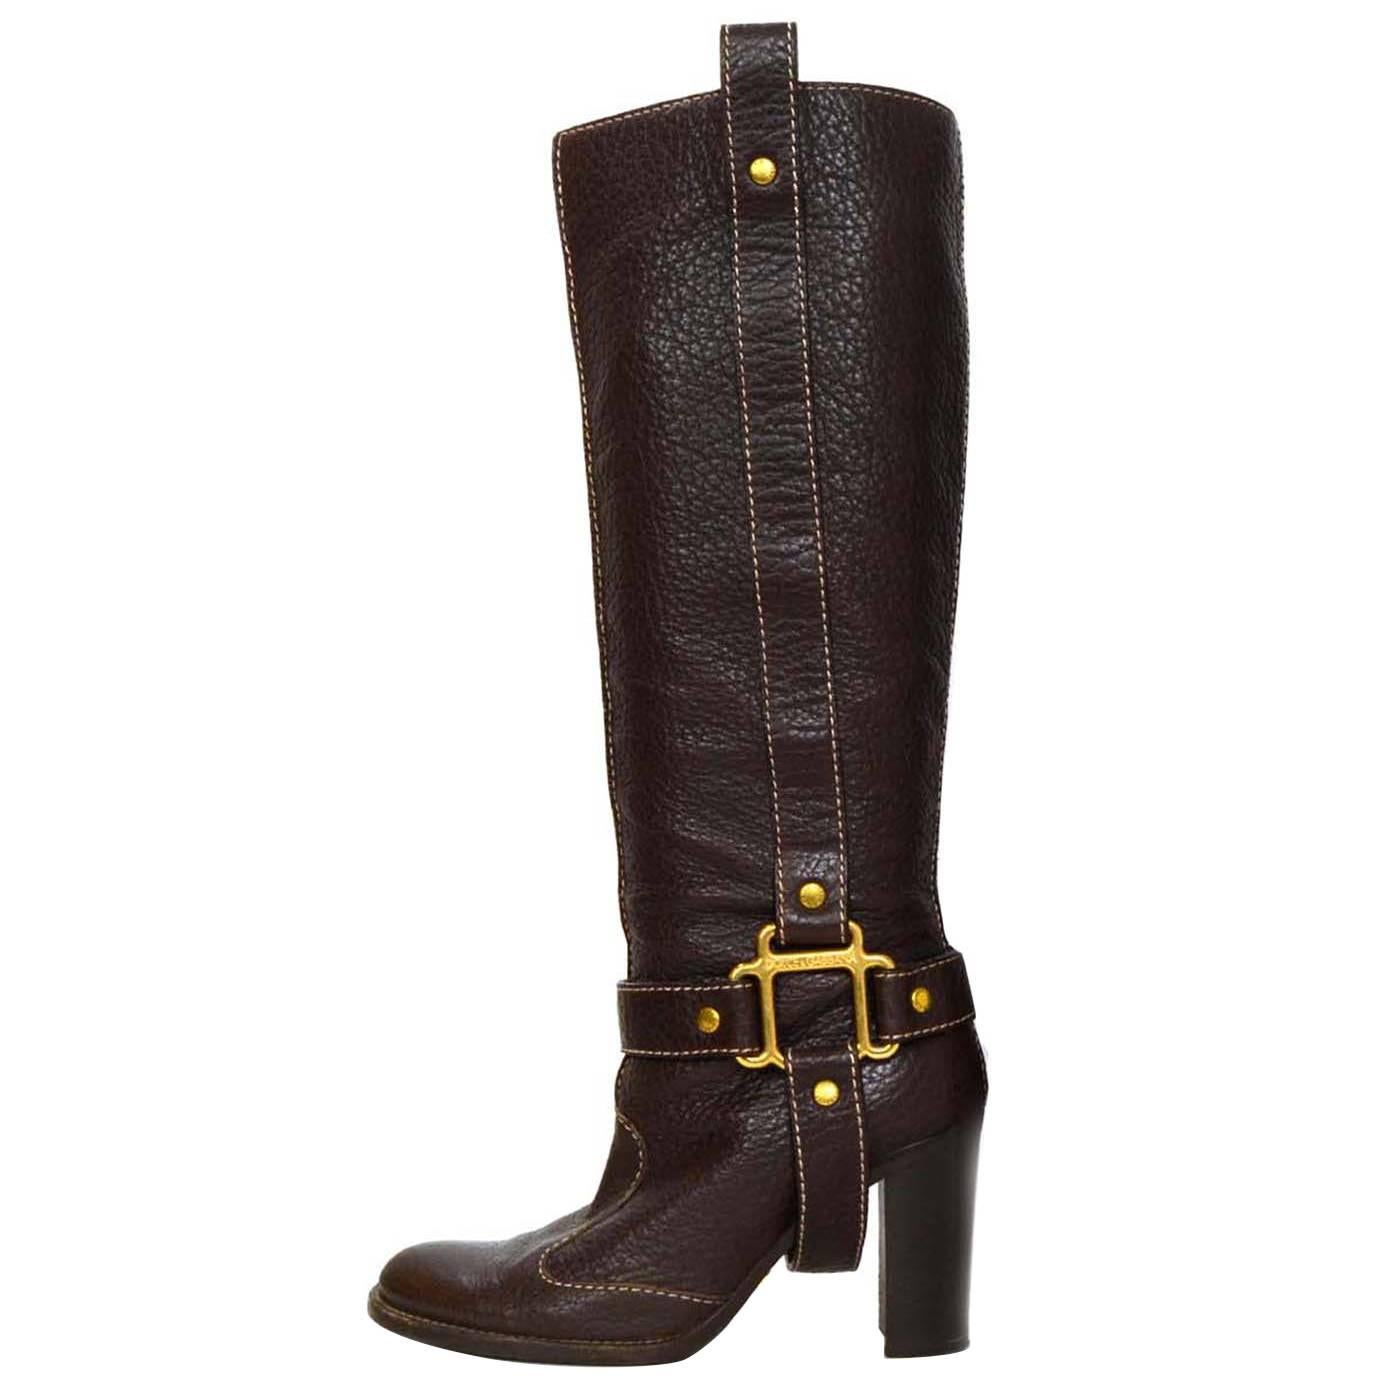 Dolce & Gabbana Brown Leather Tall Boots sz 35